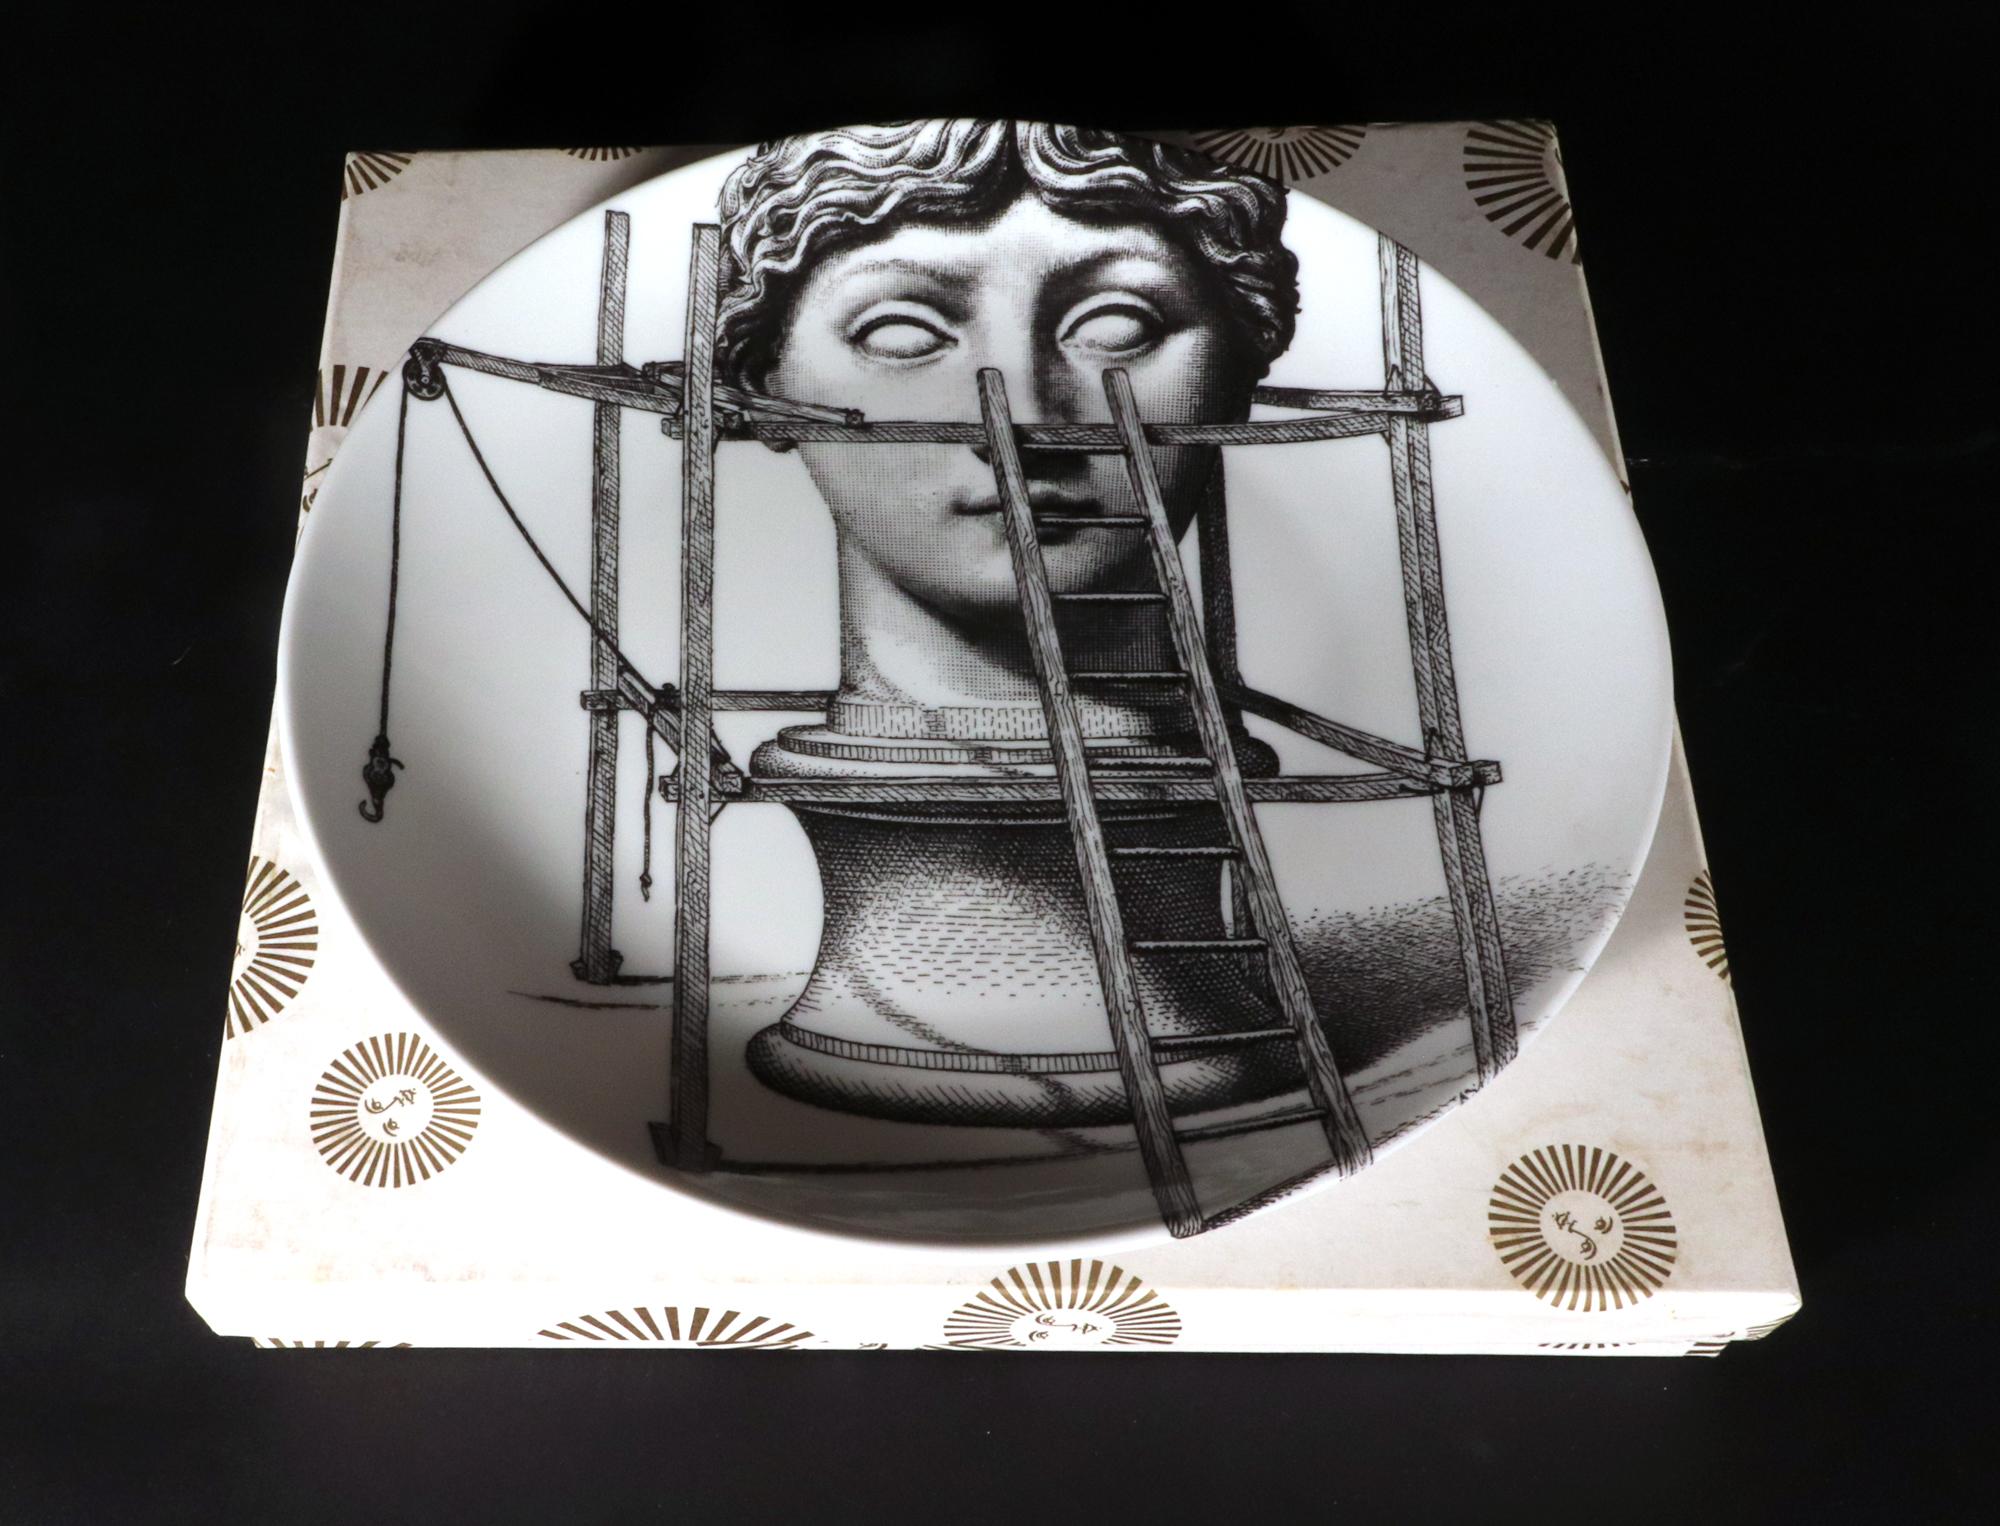 Fornasetti Themes & Variation Porcelain Plate with Original White Box, 
Number 200,
The Statue,
1990s

The Fornasetti porcelain plate is number 200 in the Themes & Variation series.  The image shows a giant neoclassical bust of a woman on a plinth